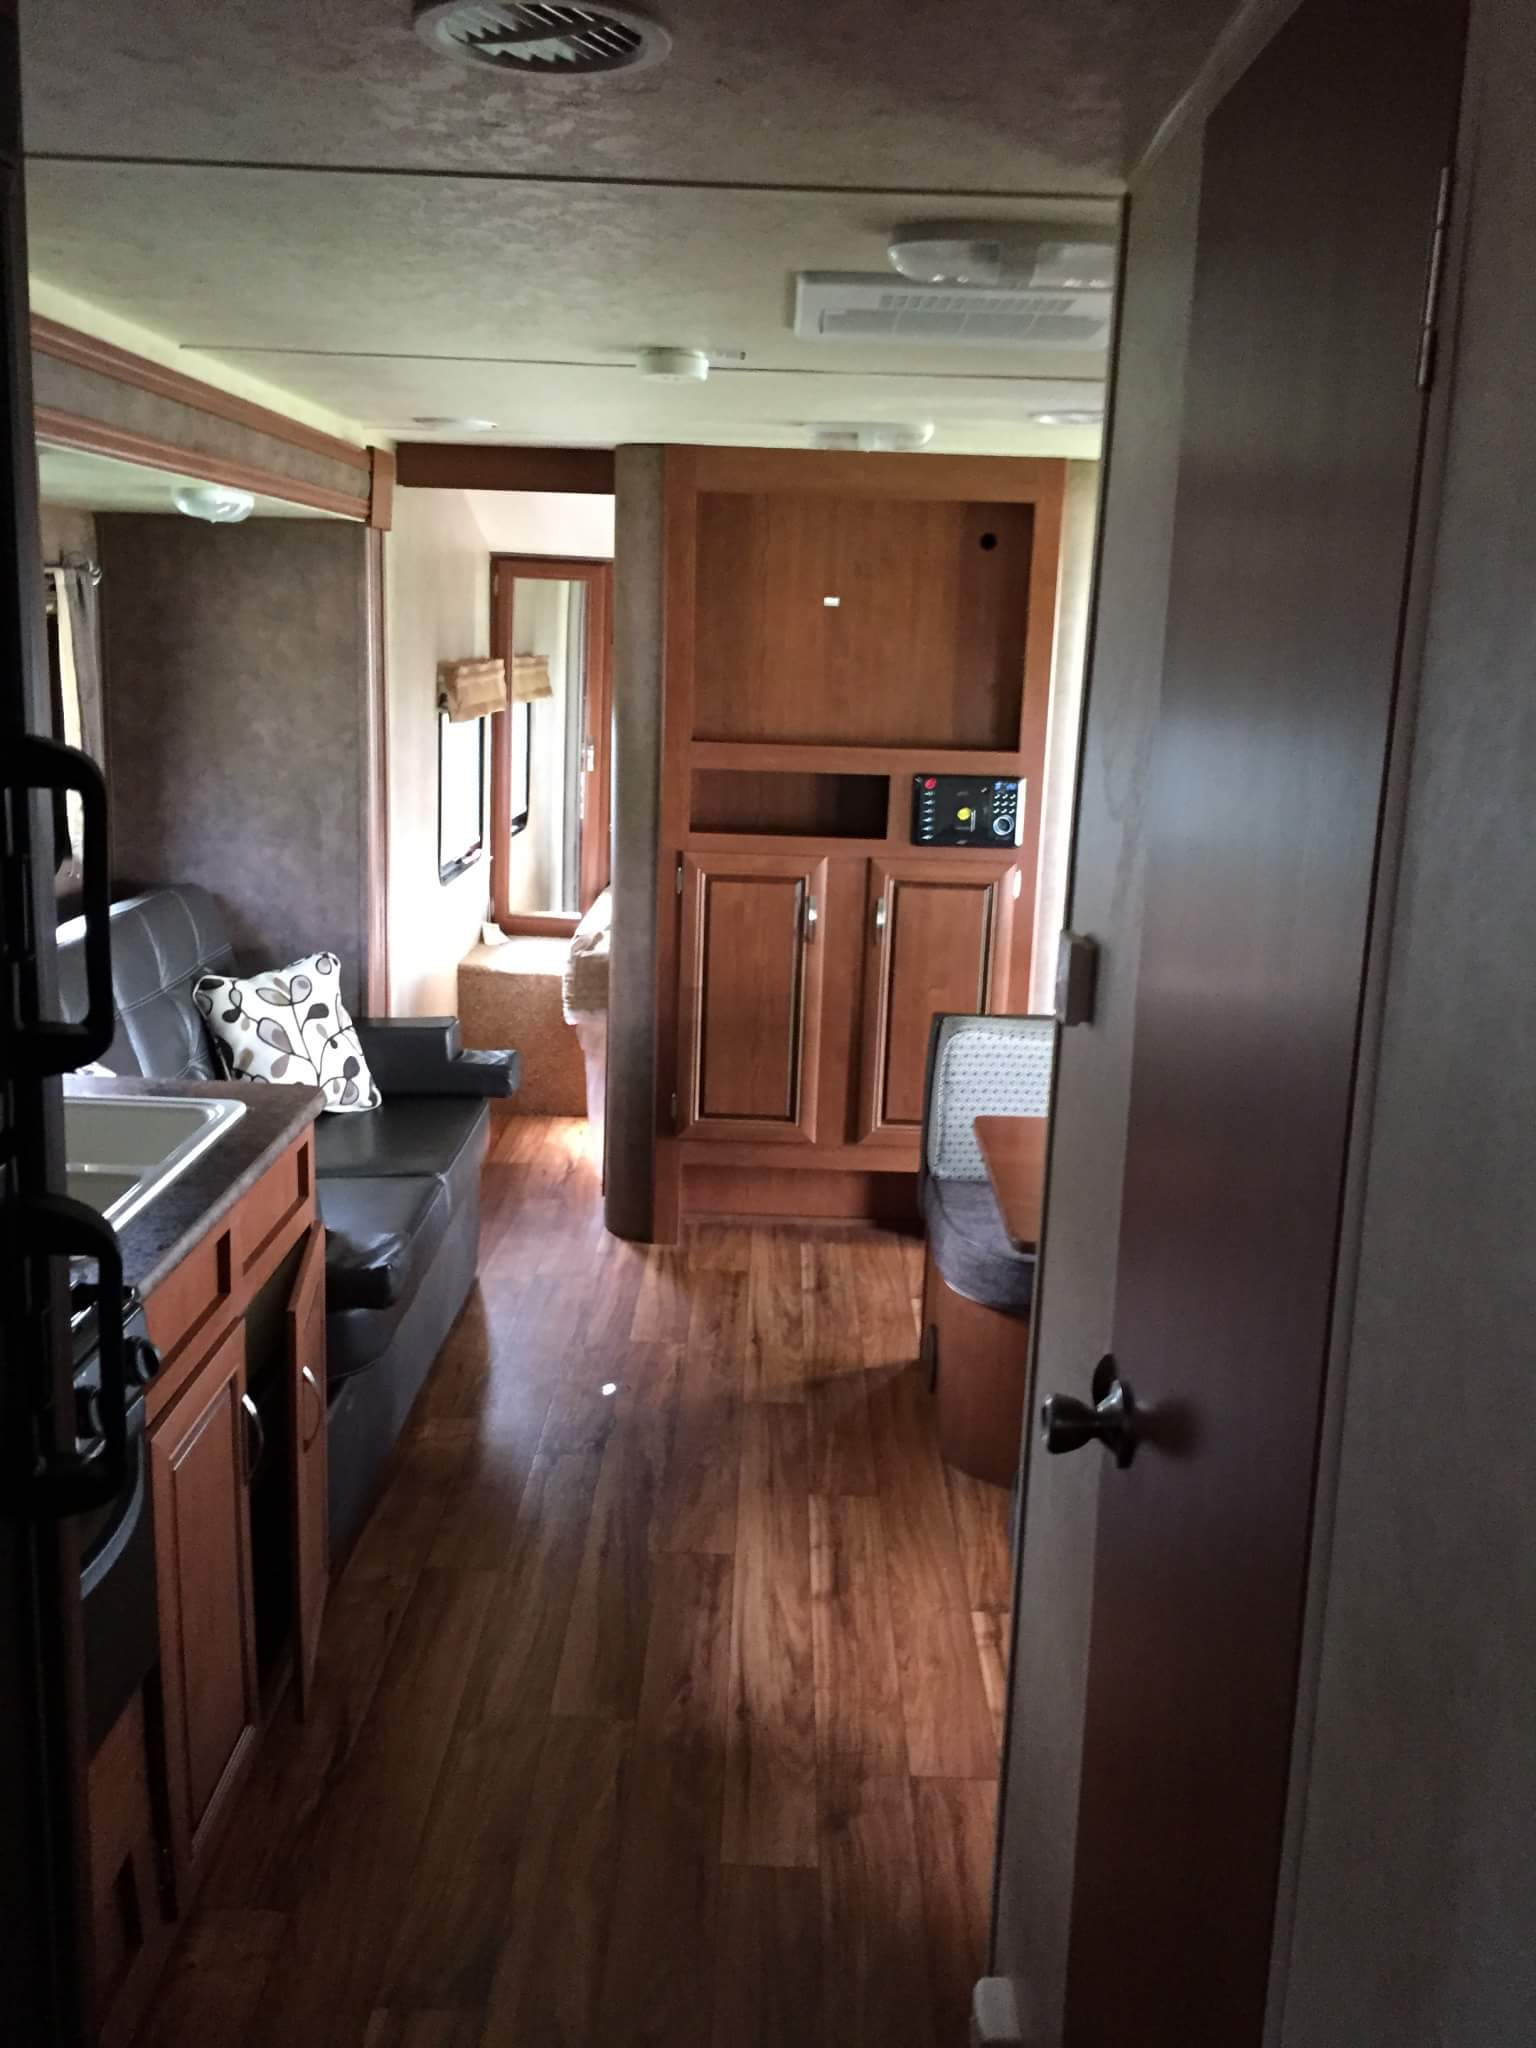 hardwood flooring danbury ct of top 25 southington ct rv rentals and motorhome rentals outdoorsy in z913hq9h01bxgbyvnl7p